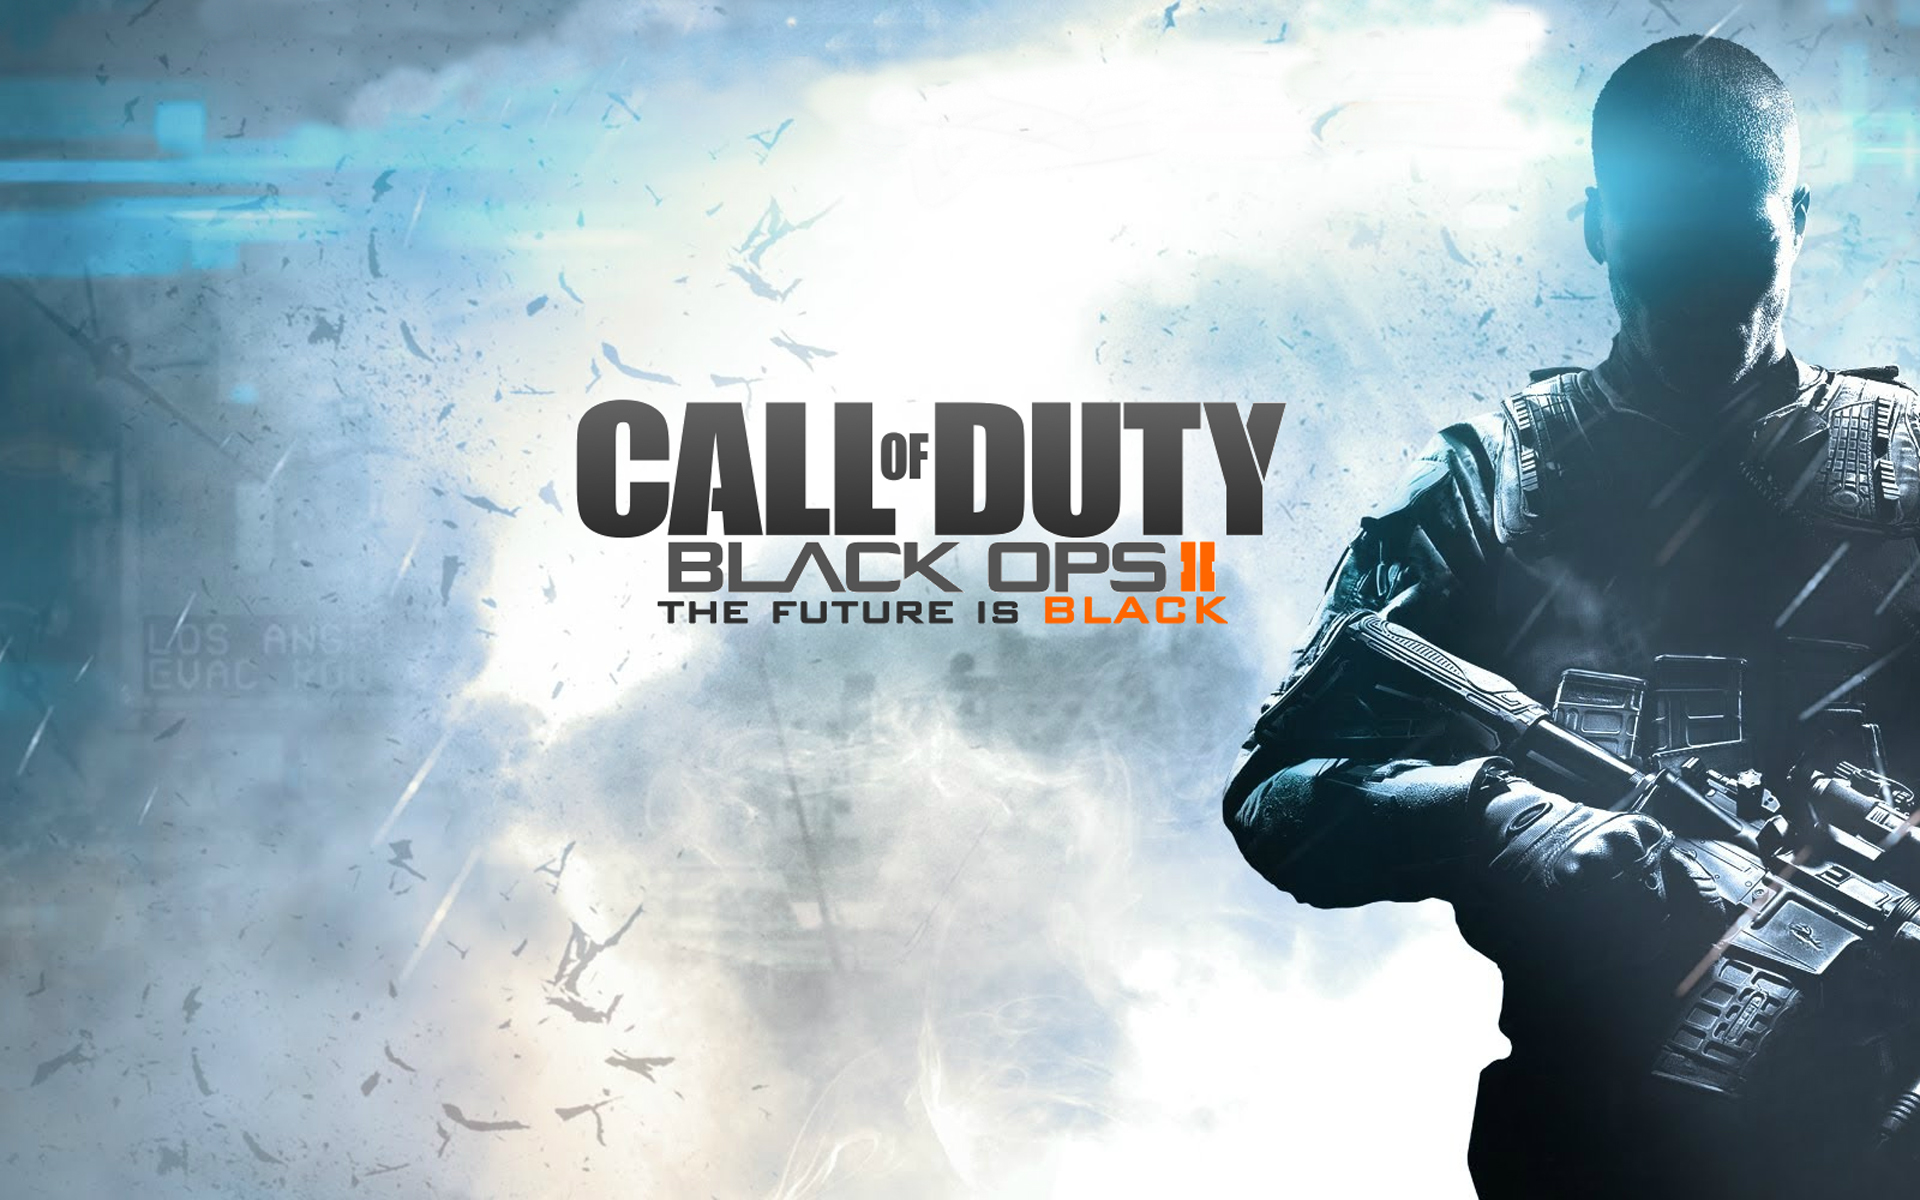 Thread Call Of Duty Bo2 Fix3 Update For Bles01717 Bles01720